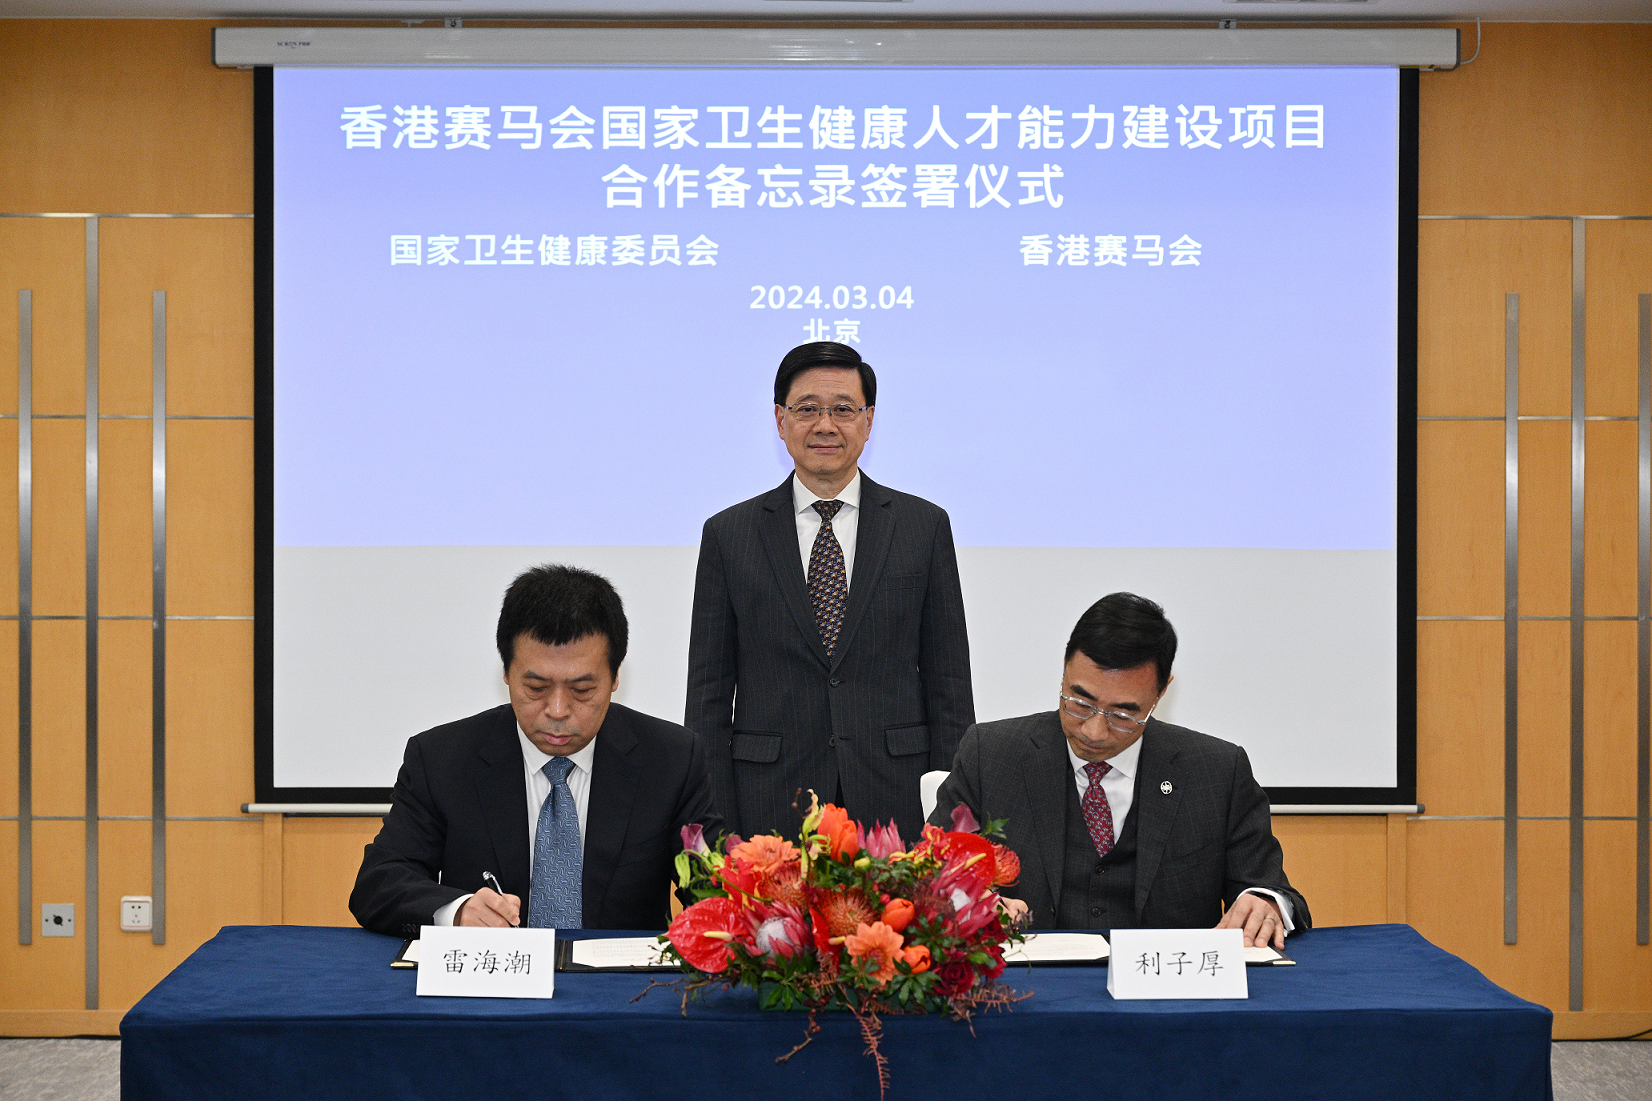 The Chief Executive, Mr John Lee, attended a signing ceremony of co-operation documents in Beijing today (March 4), witnessing the signing of co-operation documents between the Hong Kong Jockey Club and the National Health Commission (NHC) and the Health Bureau respectively on strengthening the training of healthcare talent and commencing projects on prevention and response against local communicable diseases. Photo shows Mr Lee (centre) witnessing the signing of the Memorandum of Understanding Between the National Health Commission and The Hong Kong Jockey Club on a National Capacity Building Programme for Human Resources for Health by the Chairman of the Hong Kong Jockey Club, Mr Michael Lee (right), and Vice-minister of the NHC Mr Lei Haichao (left).
